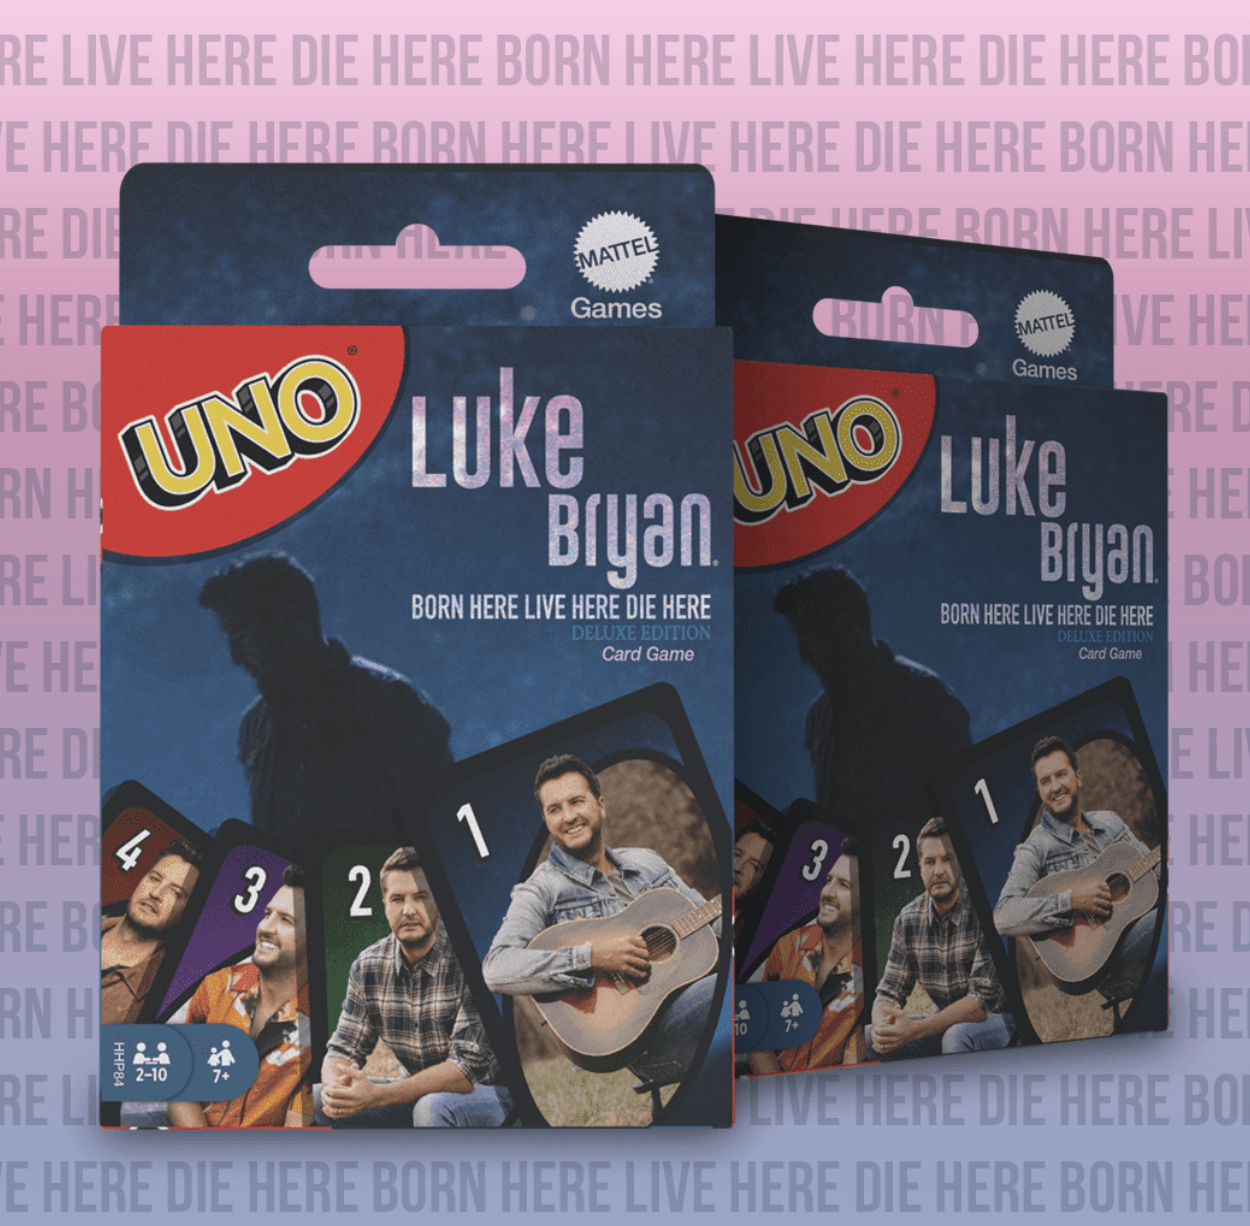 Luke Bryan Teams Up with UNO for Customized “Born Here Live Here Die Here” Decks for Fans